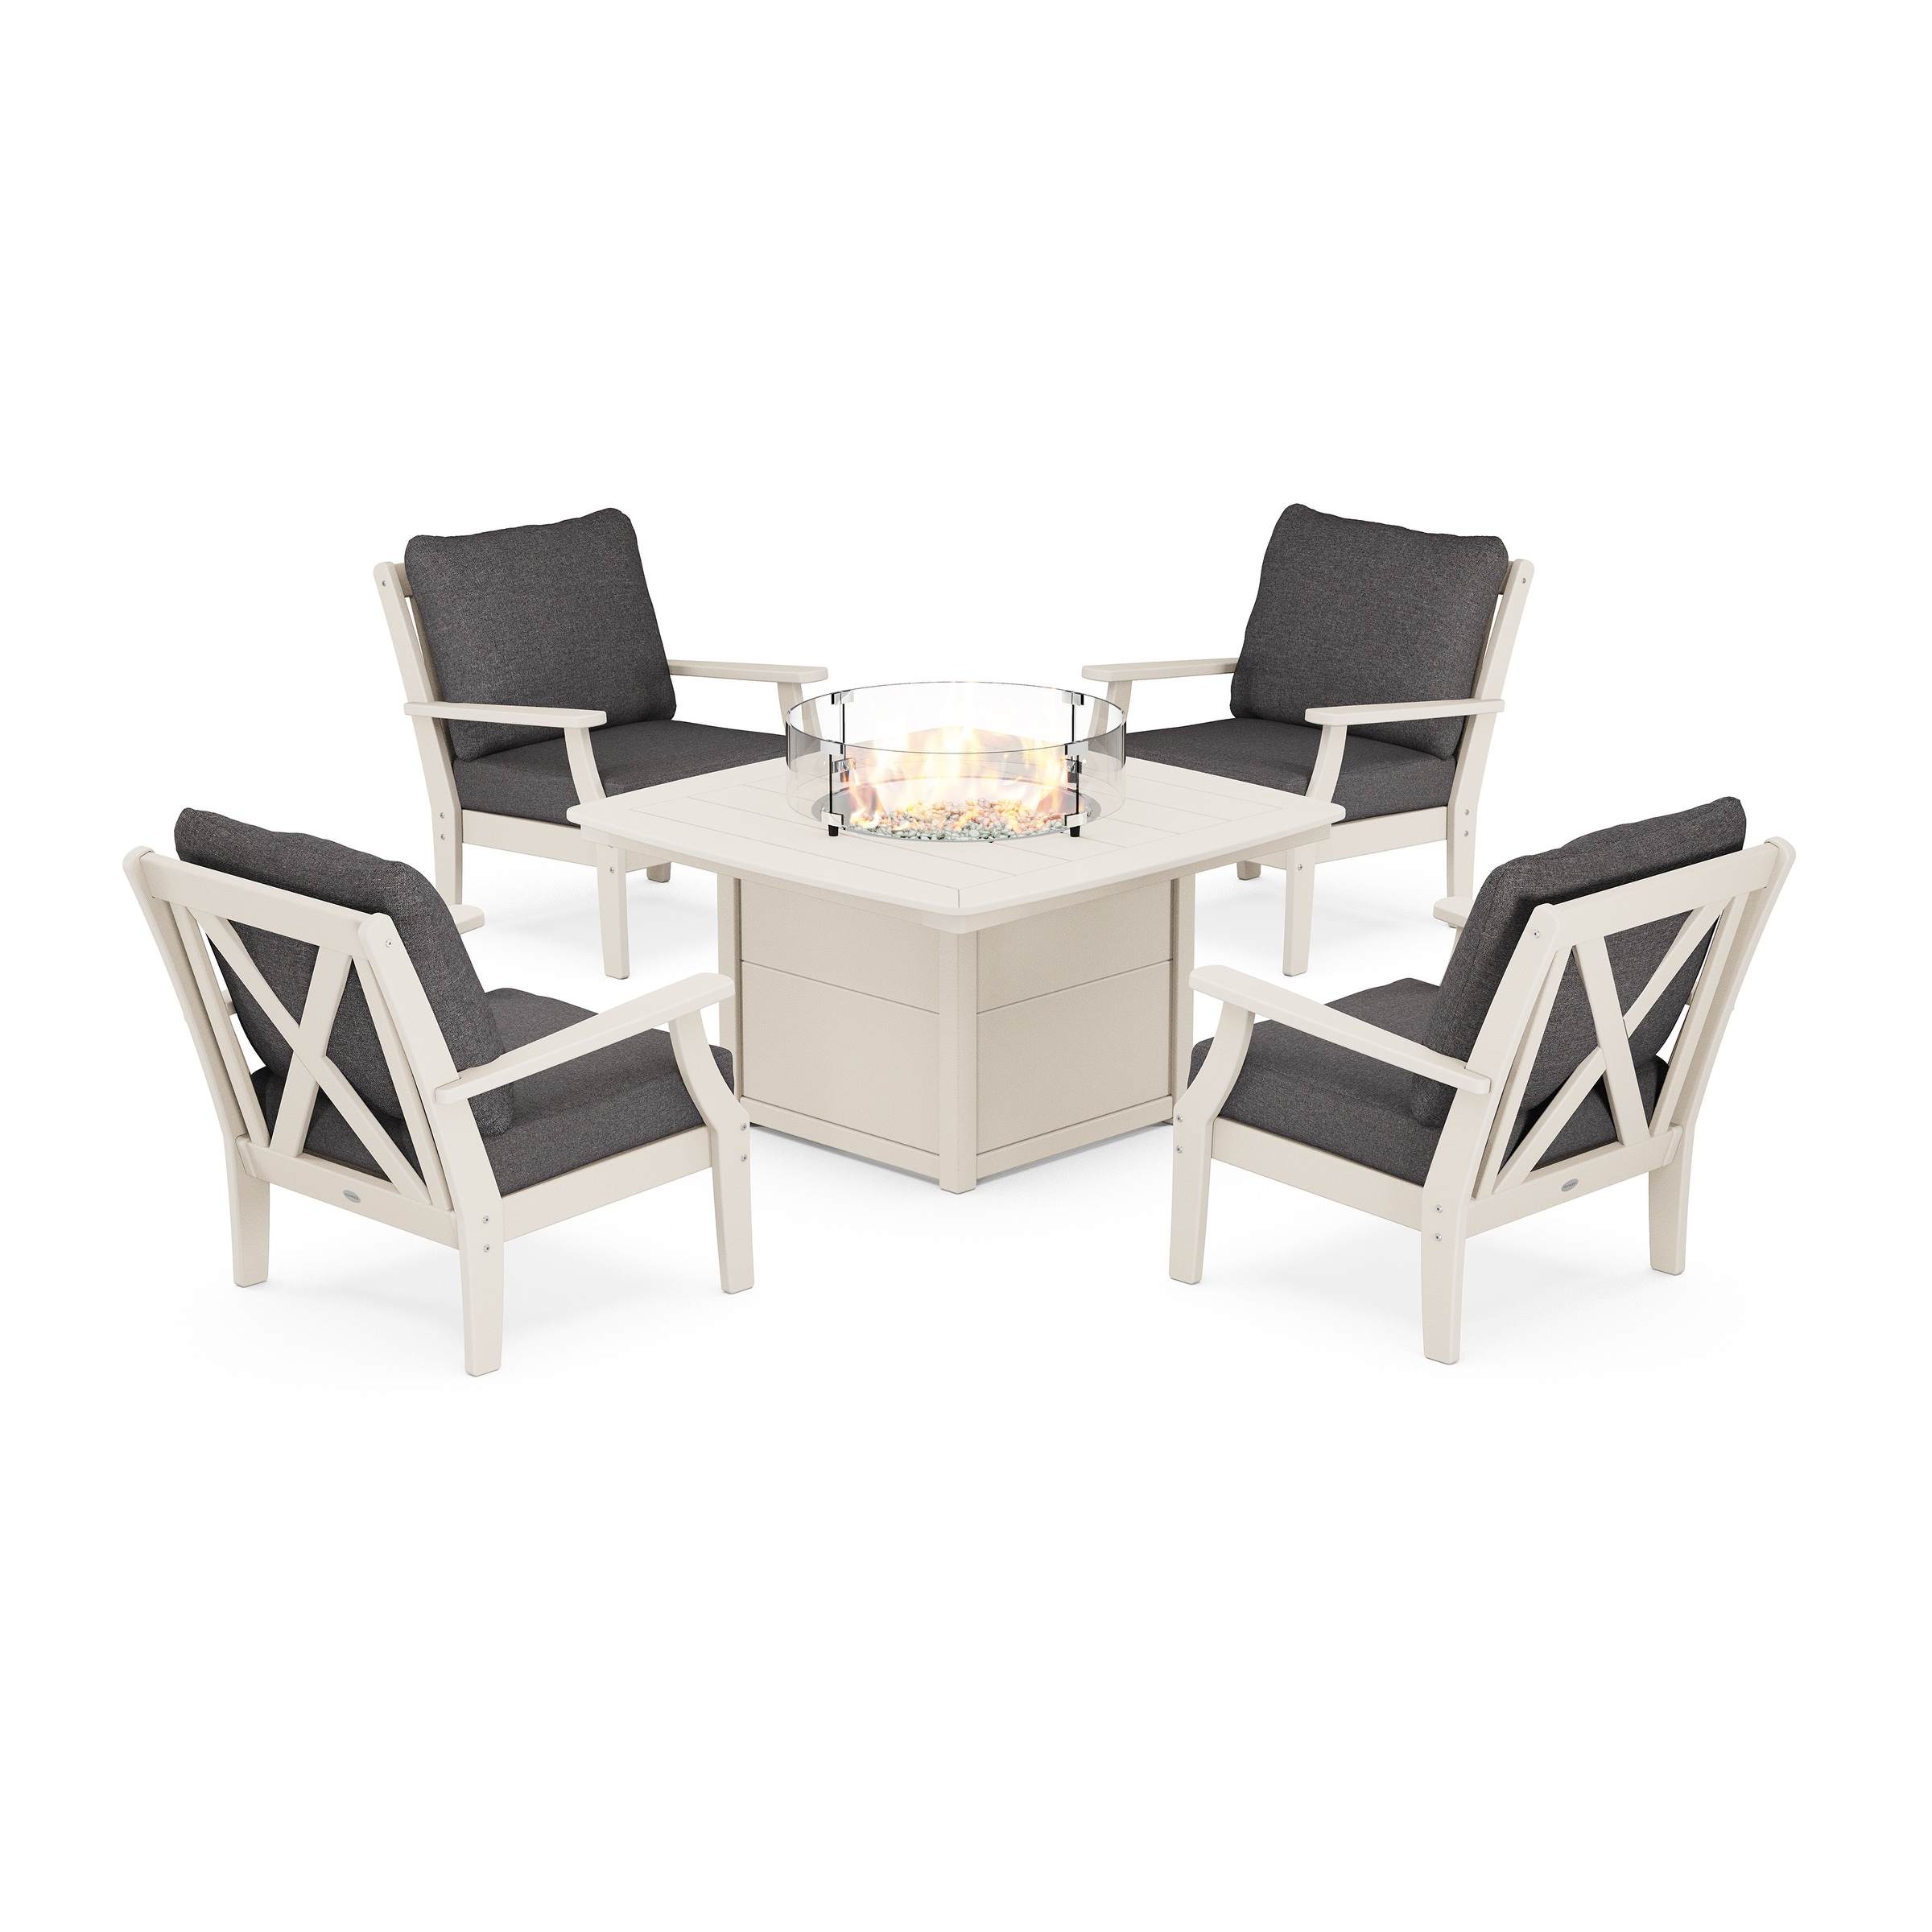 Polywood Braxton 5-piece Deep Seating Conversation Set With Fire Pit Table